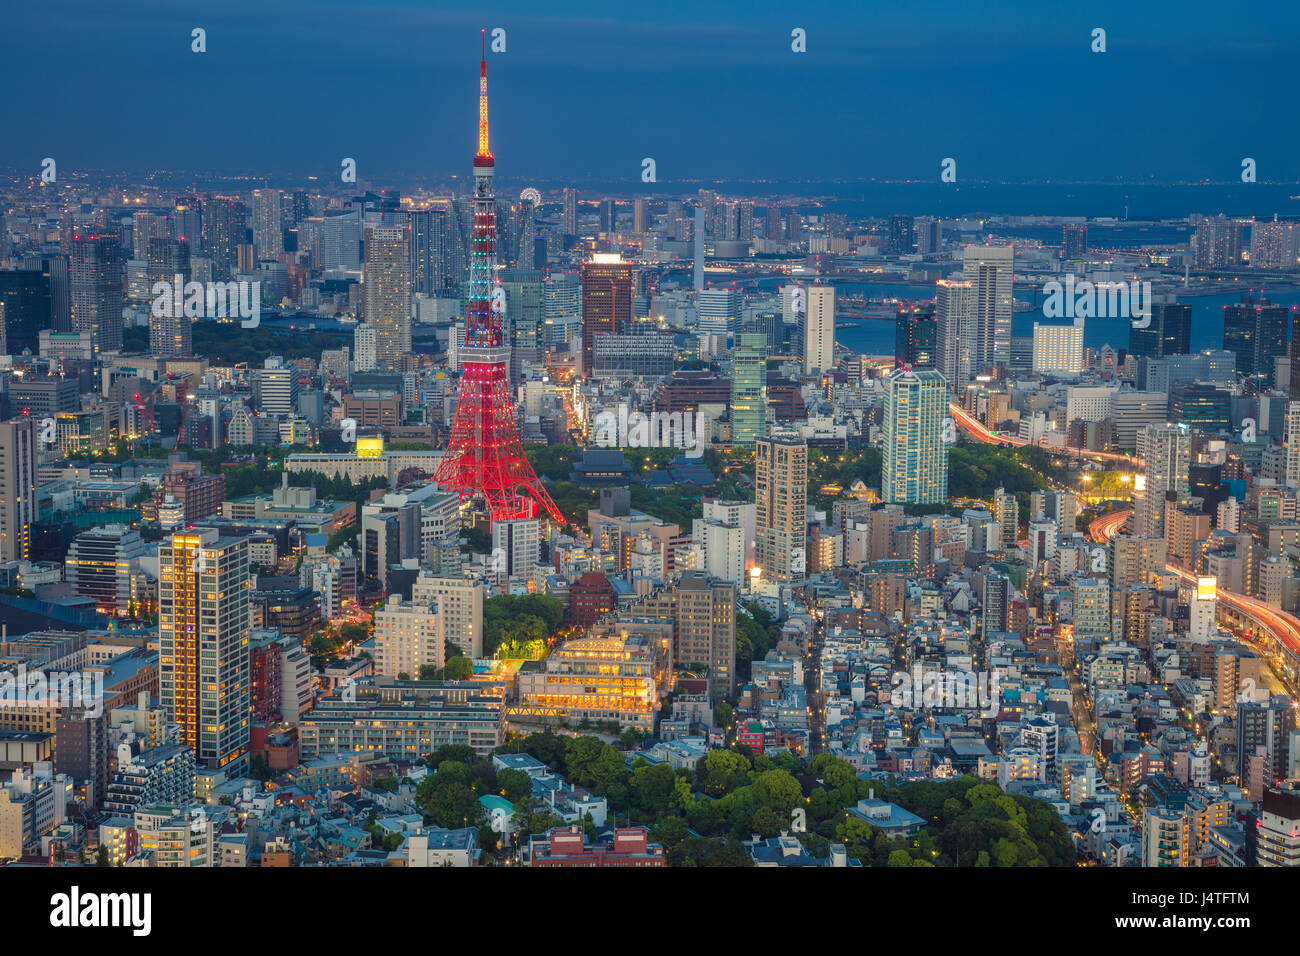 Tokyo. Cityscape image of Tokyo, Japan during twilight blue hour. Stock Photo